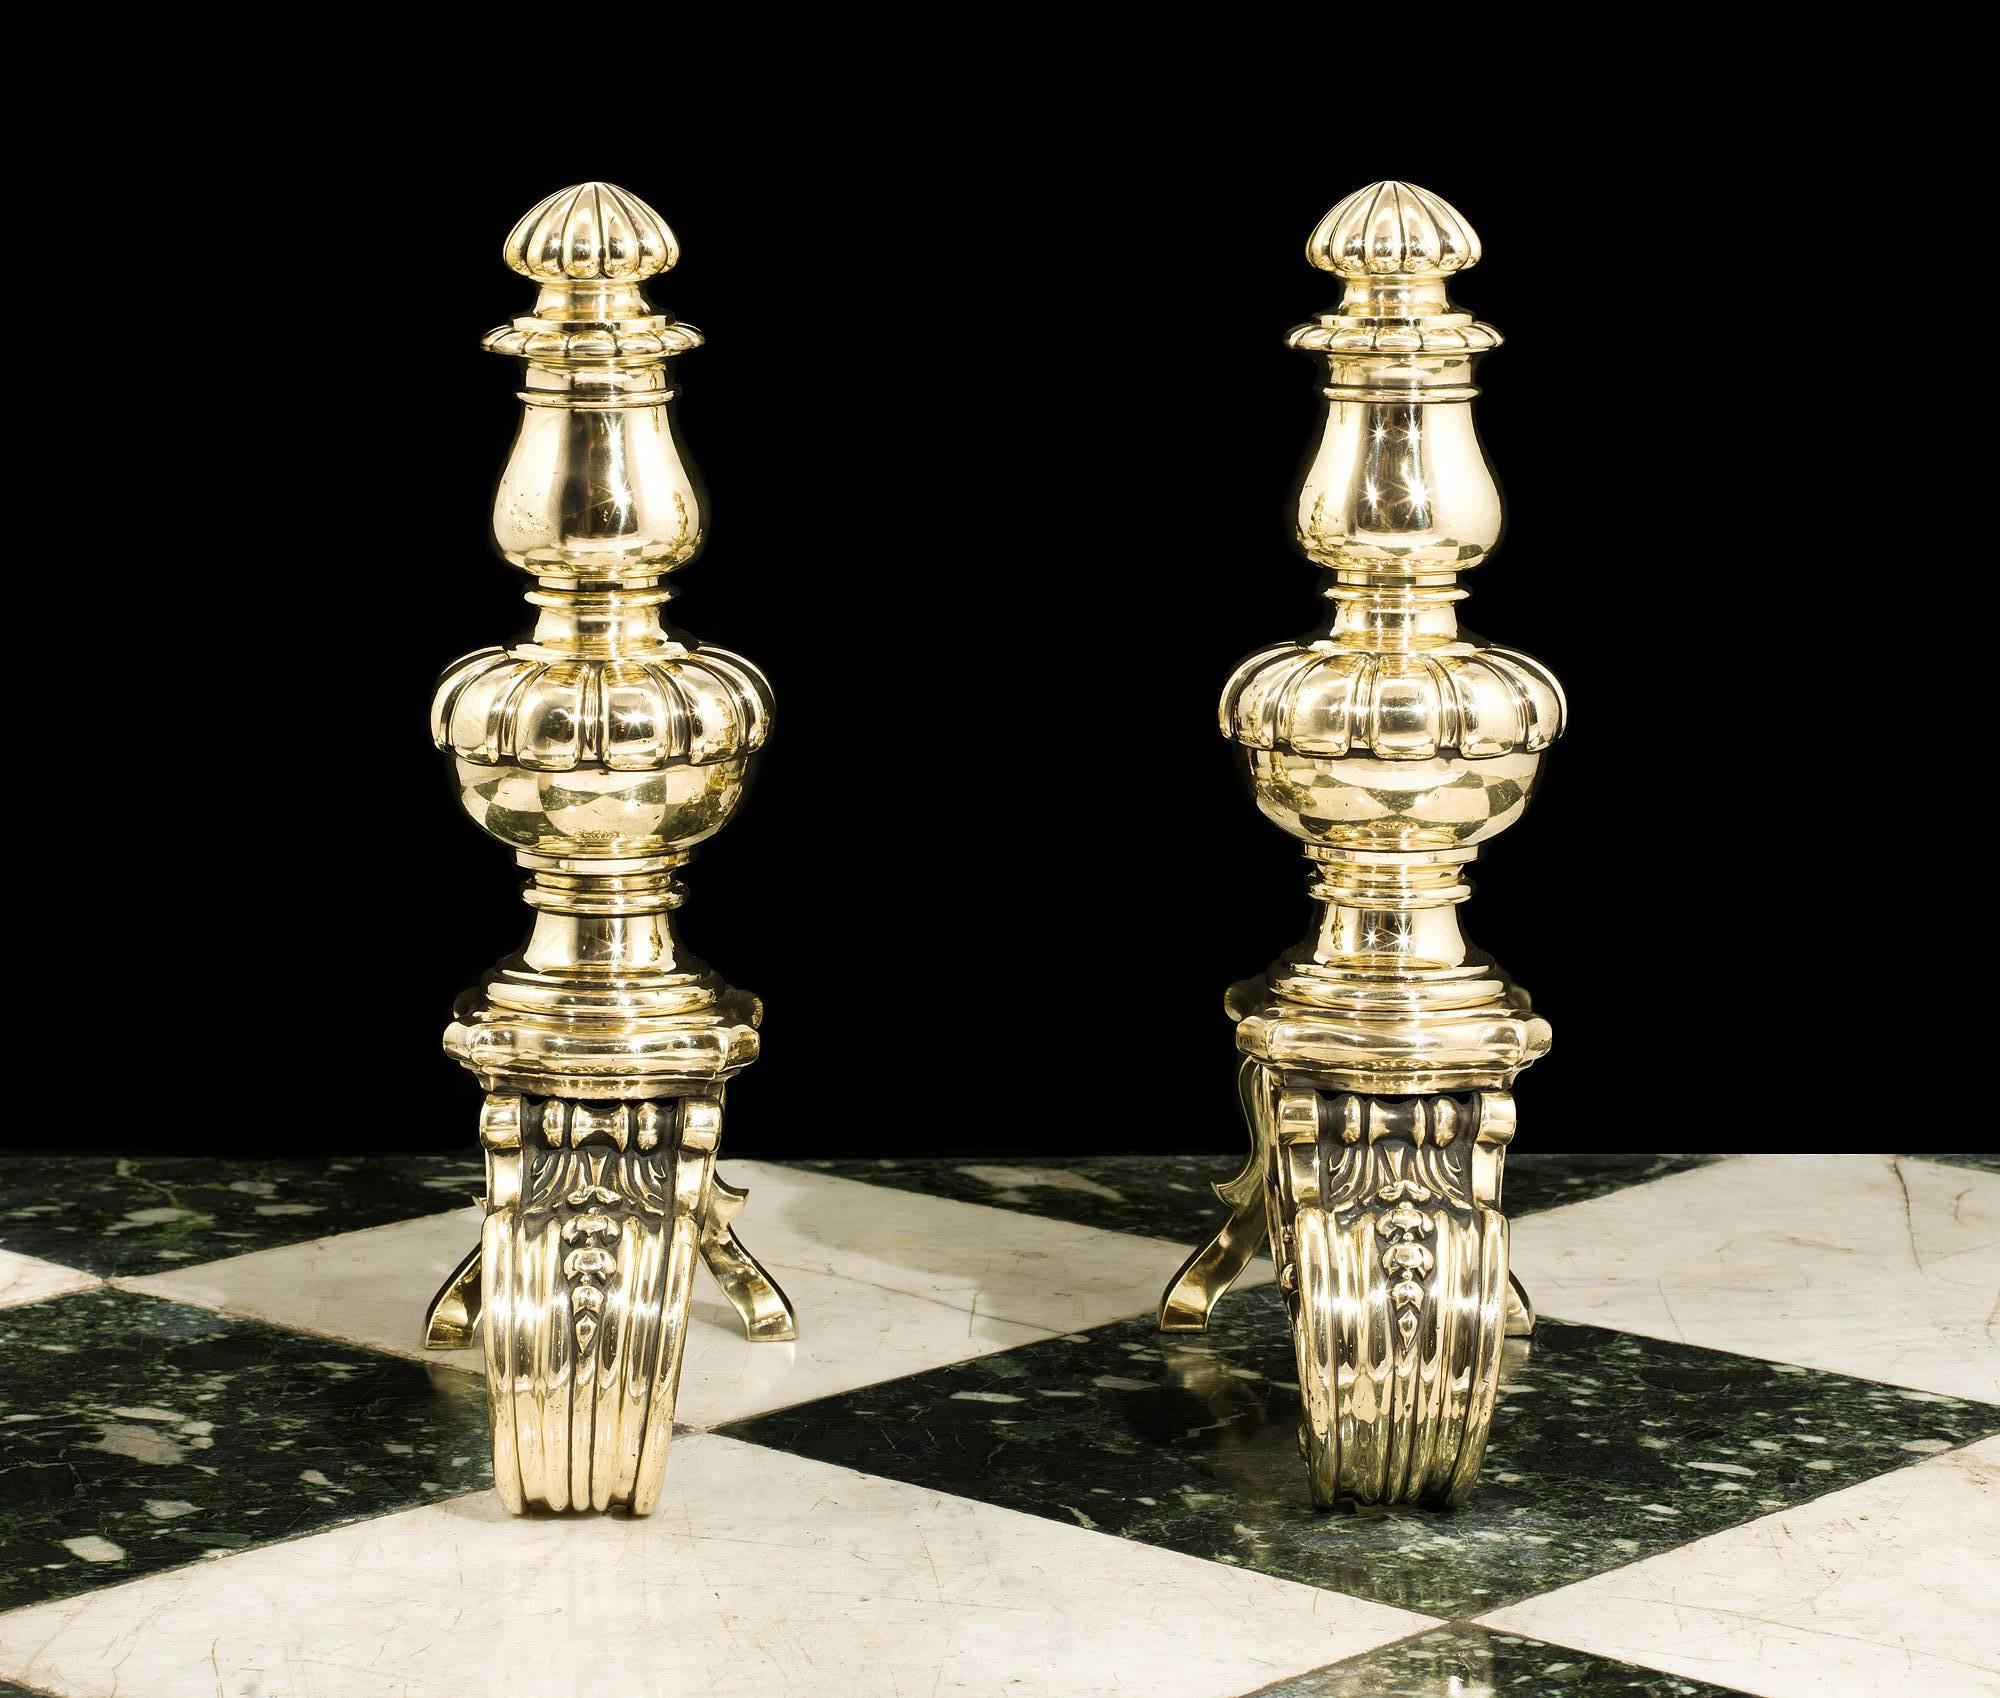 Baroque Revival Pair of Substantial Heavily Cast Brass Antique Chenets in the Baroque Style